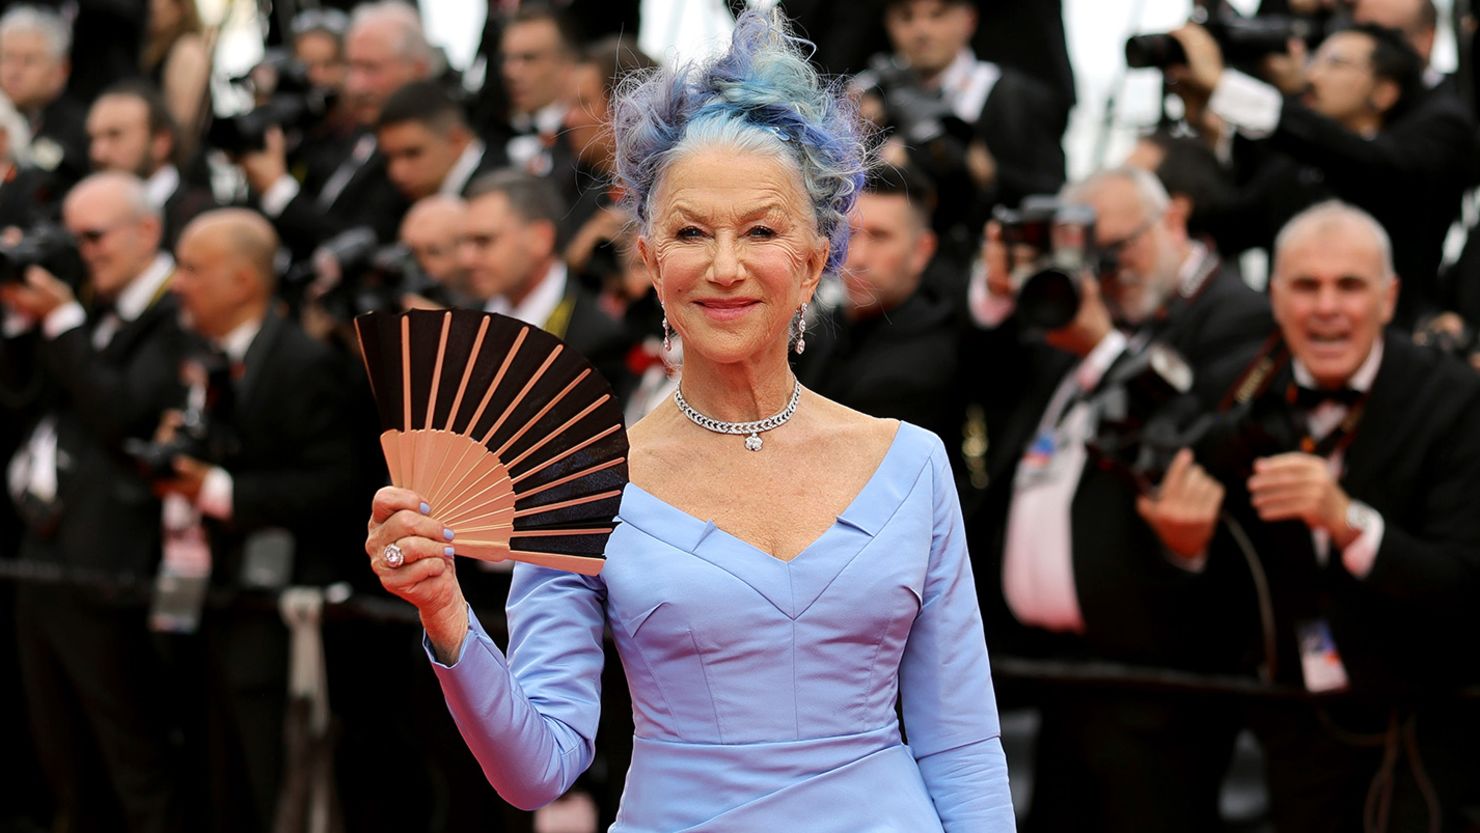 Helen Mirren attends the "Jeanne du Barry" screening and opening ceremony red carpet at the 76th annual Cannes Film Festival on May 16, 2023.